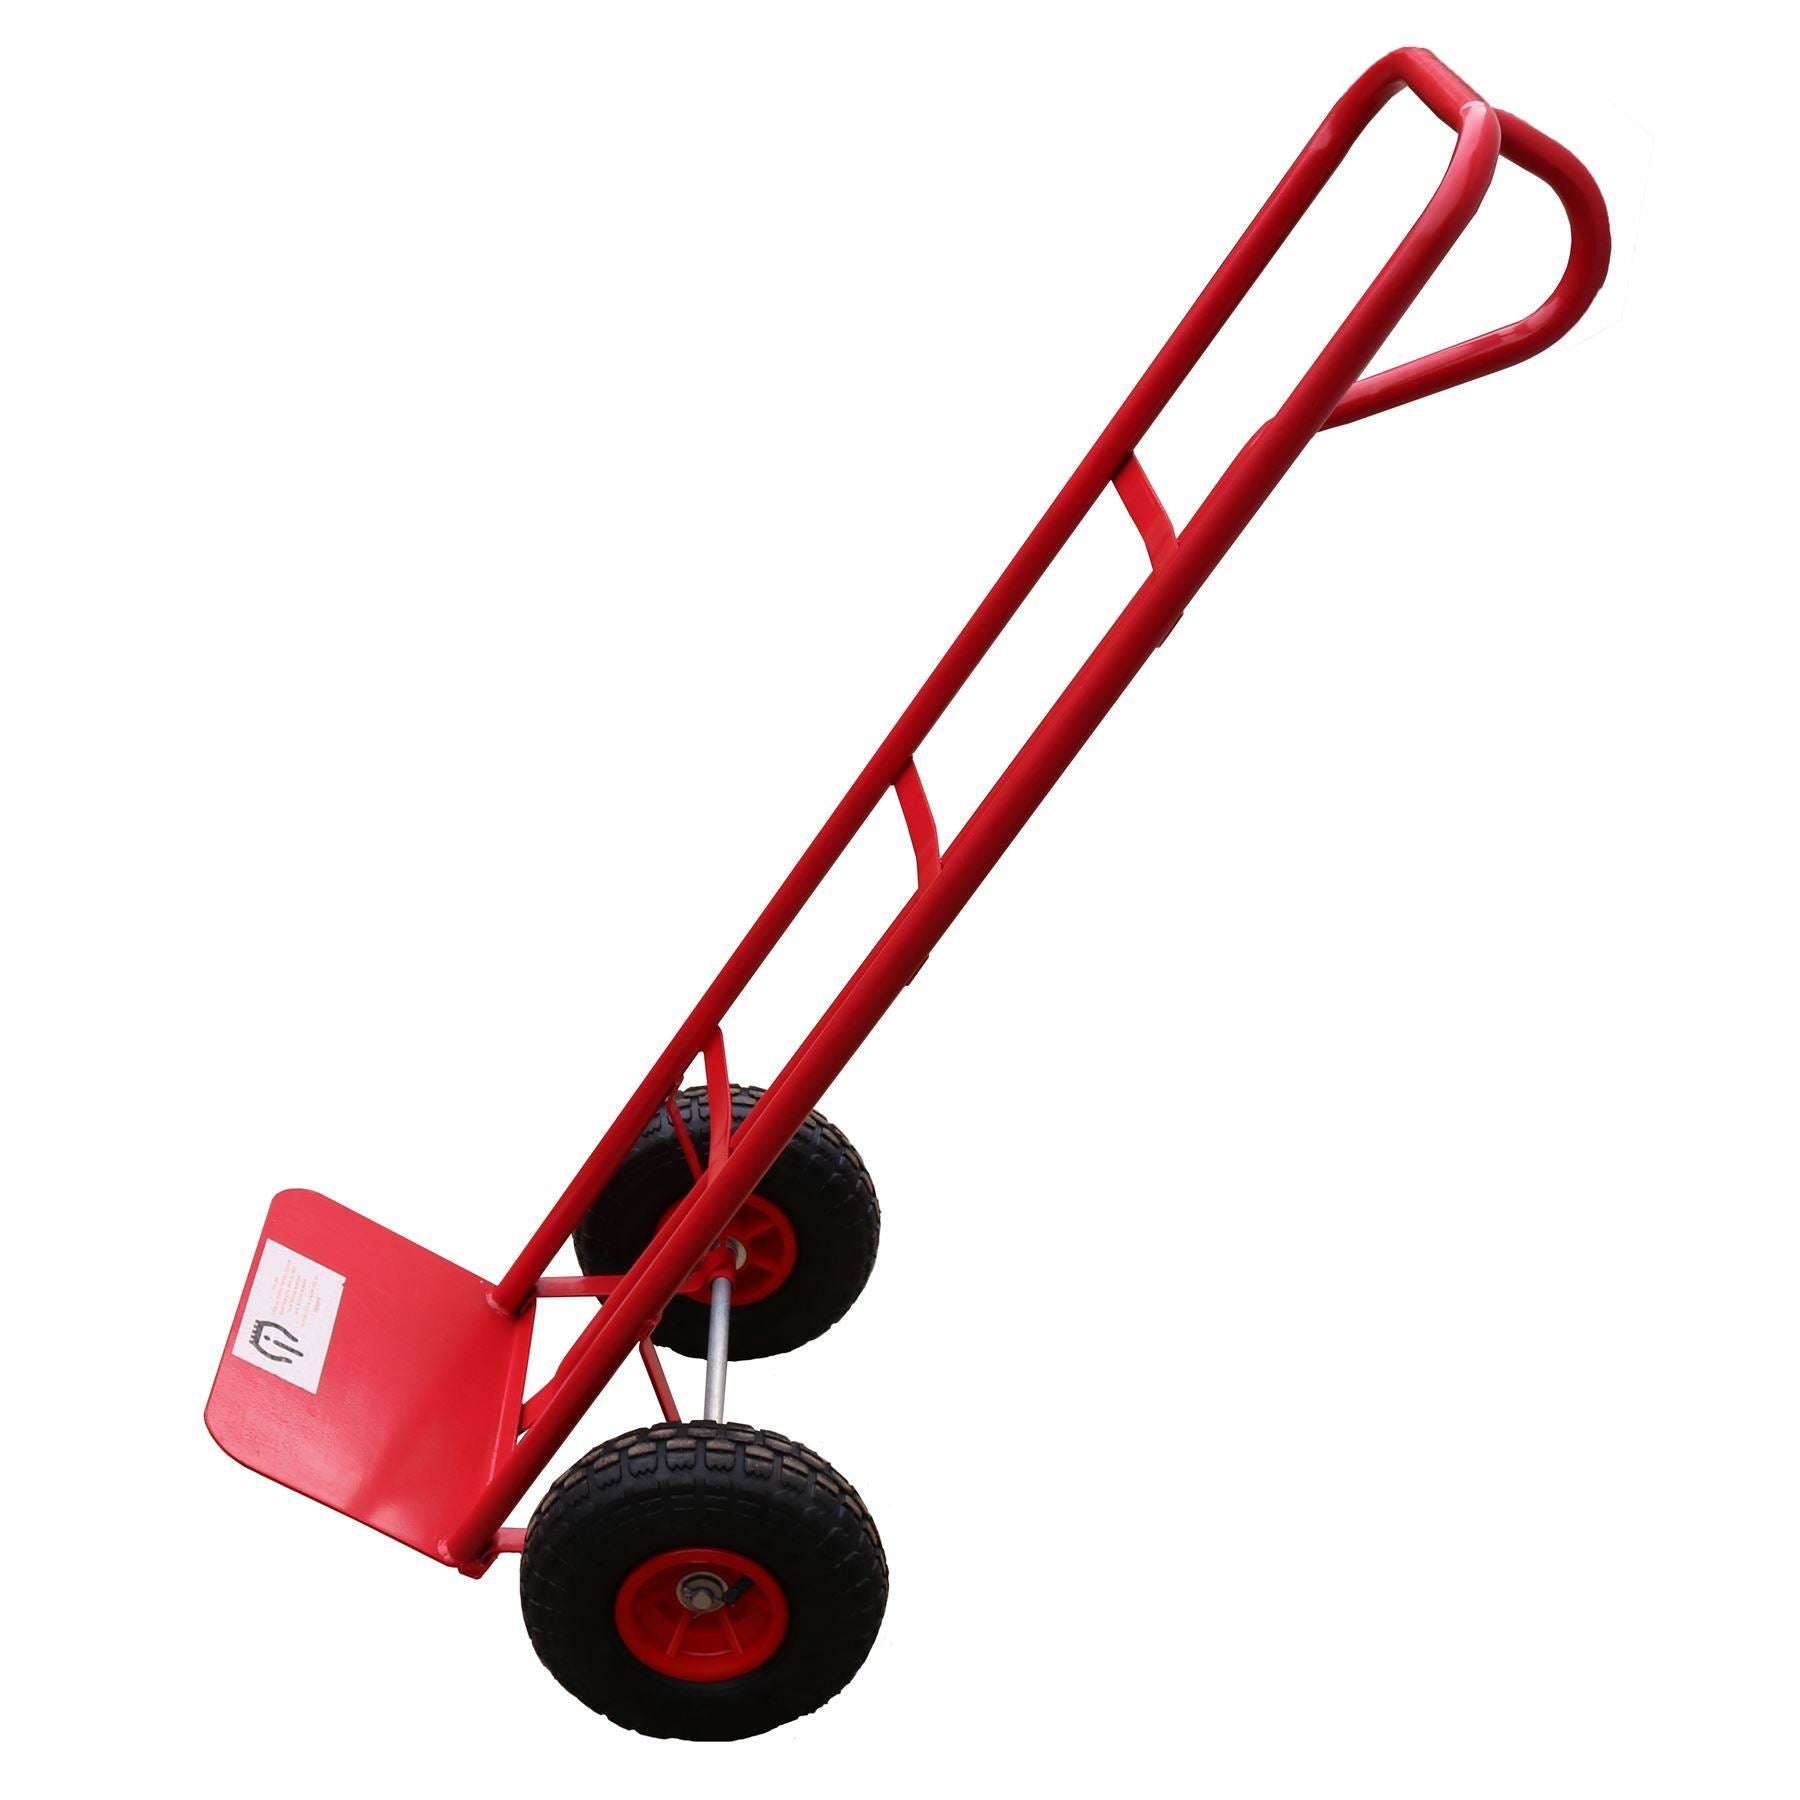 B GRADE Sack Truck 600lb With Pneumatic Wheels Red Steel Hand Trolley Stacker Truck